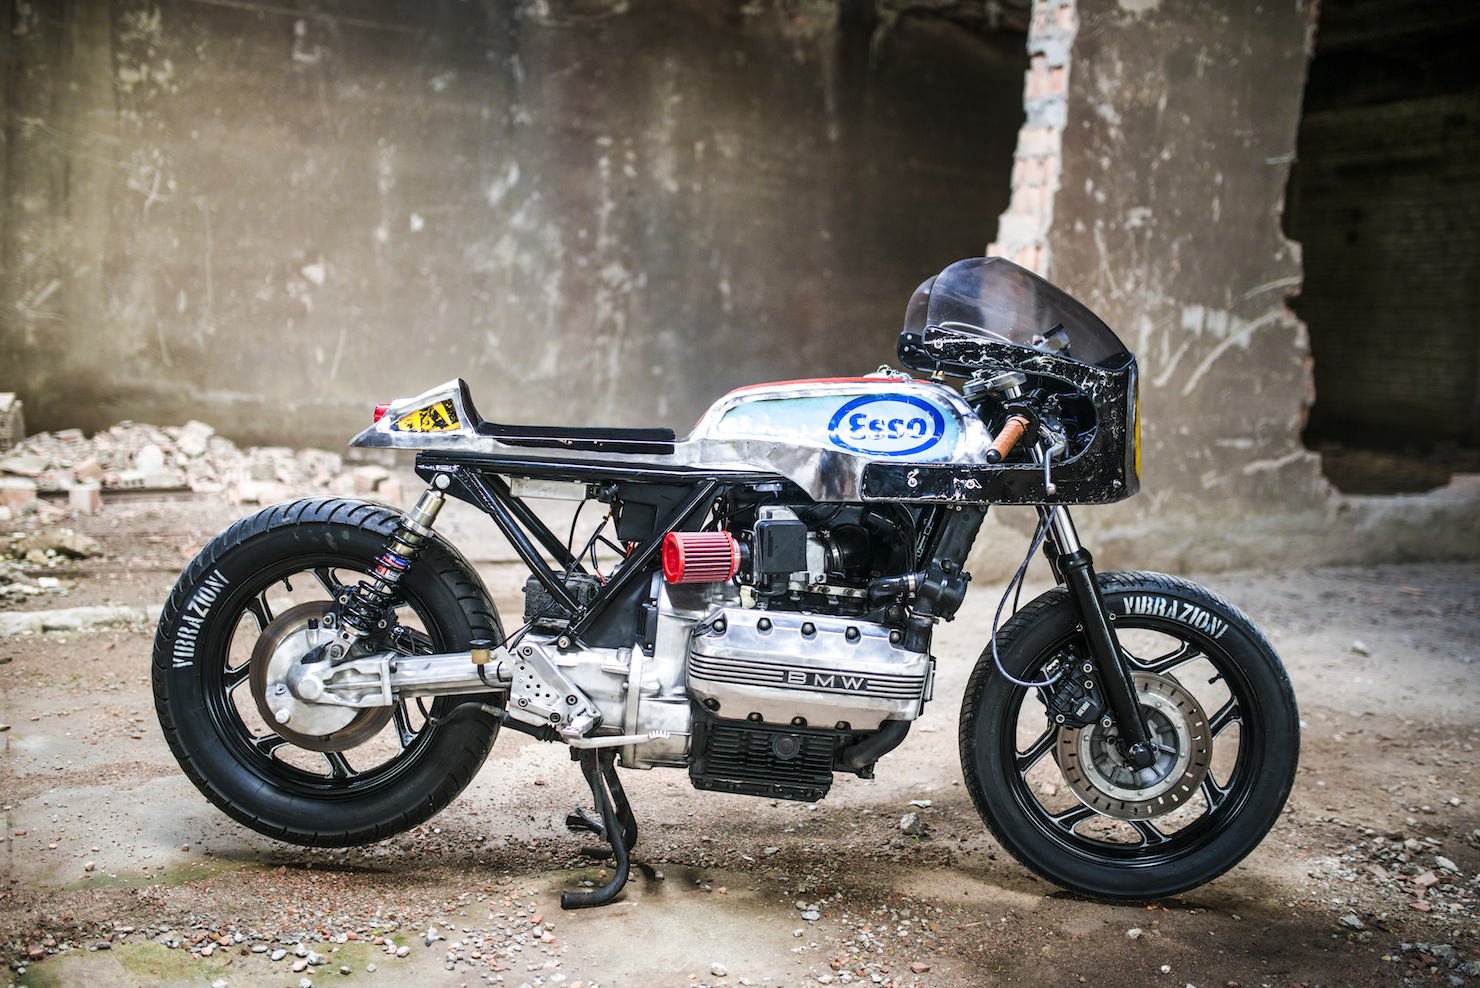 What is a bmw cafe racer #1